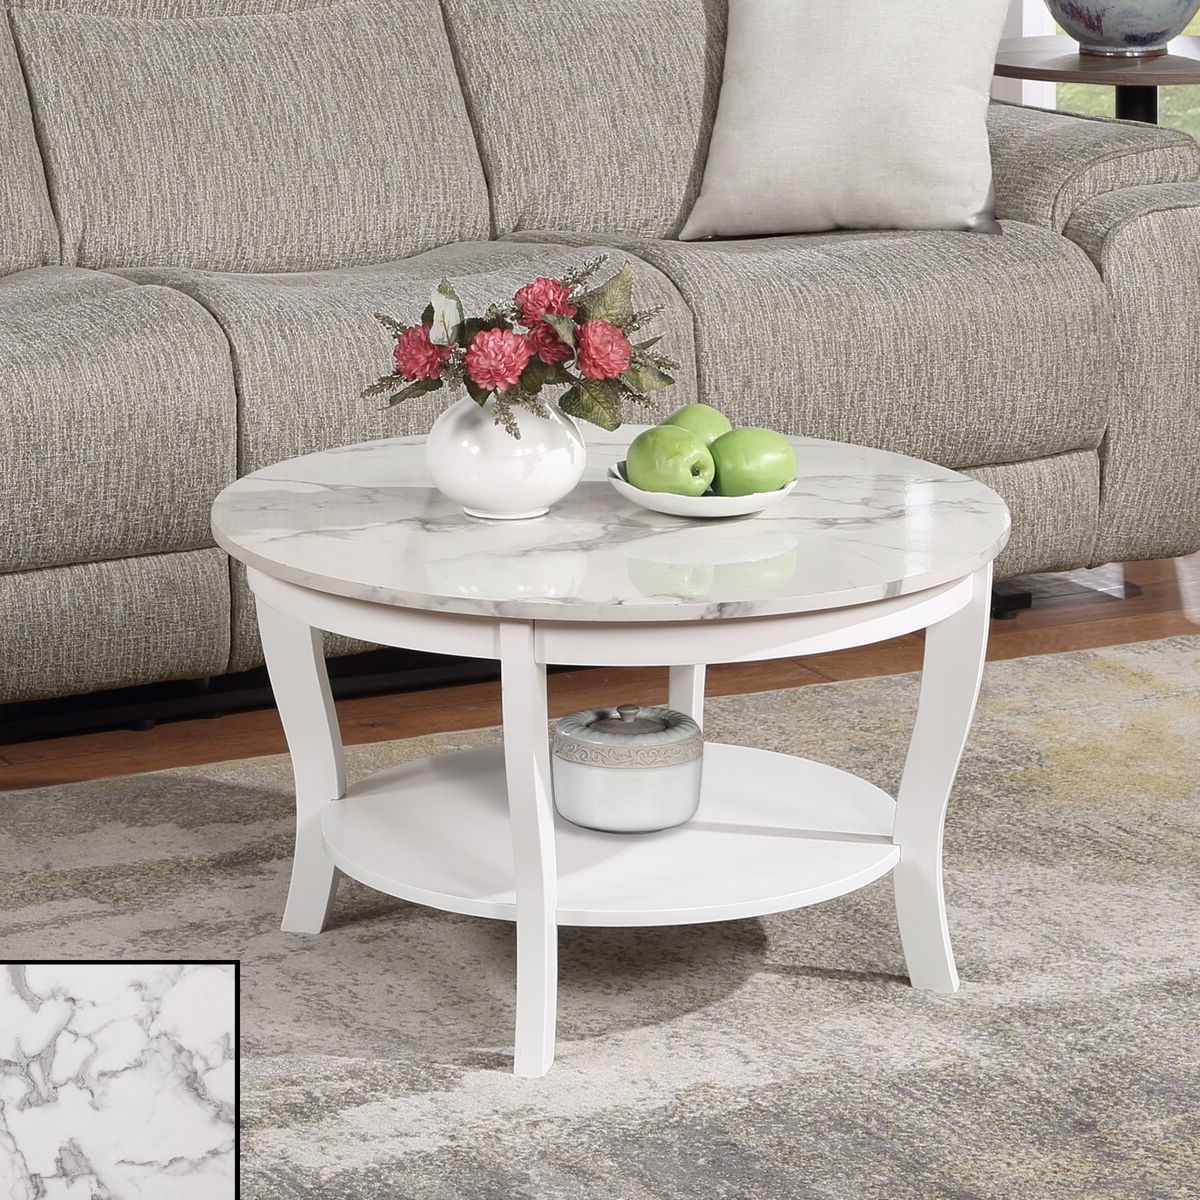 Ebay In Popular American Heritage Round Coffee Tables (Photo 9 of 10)